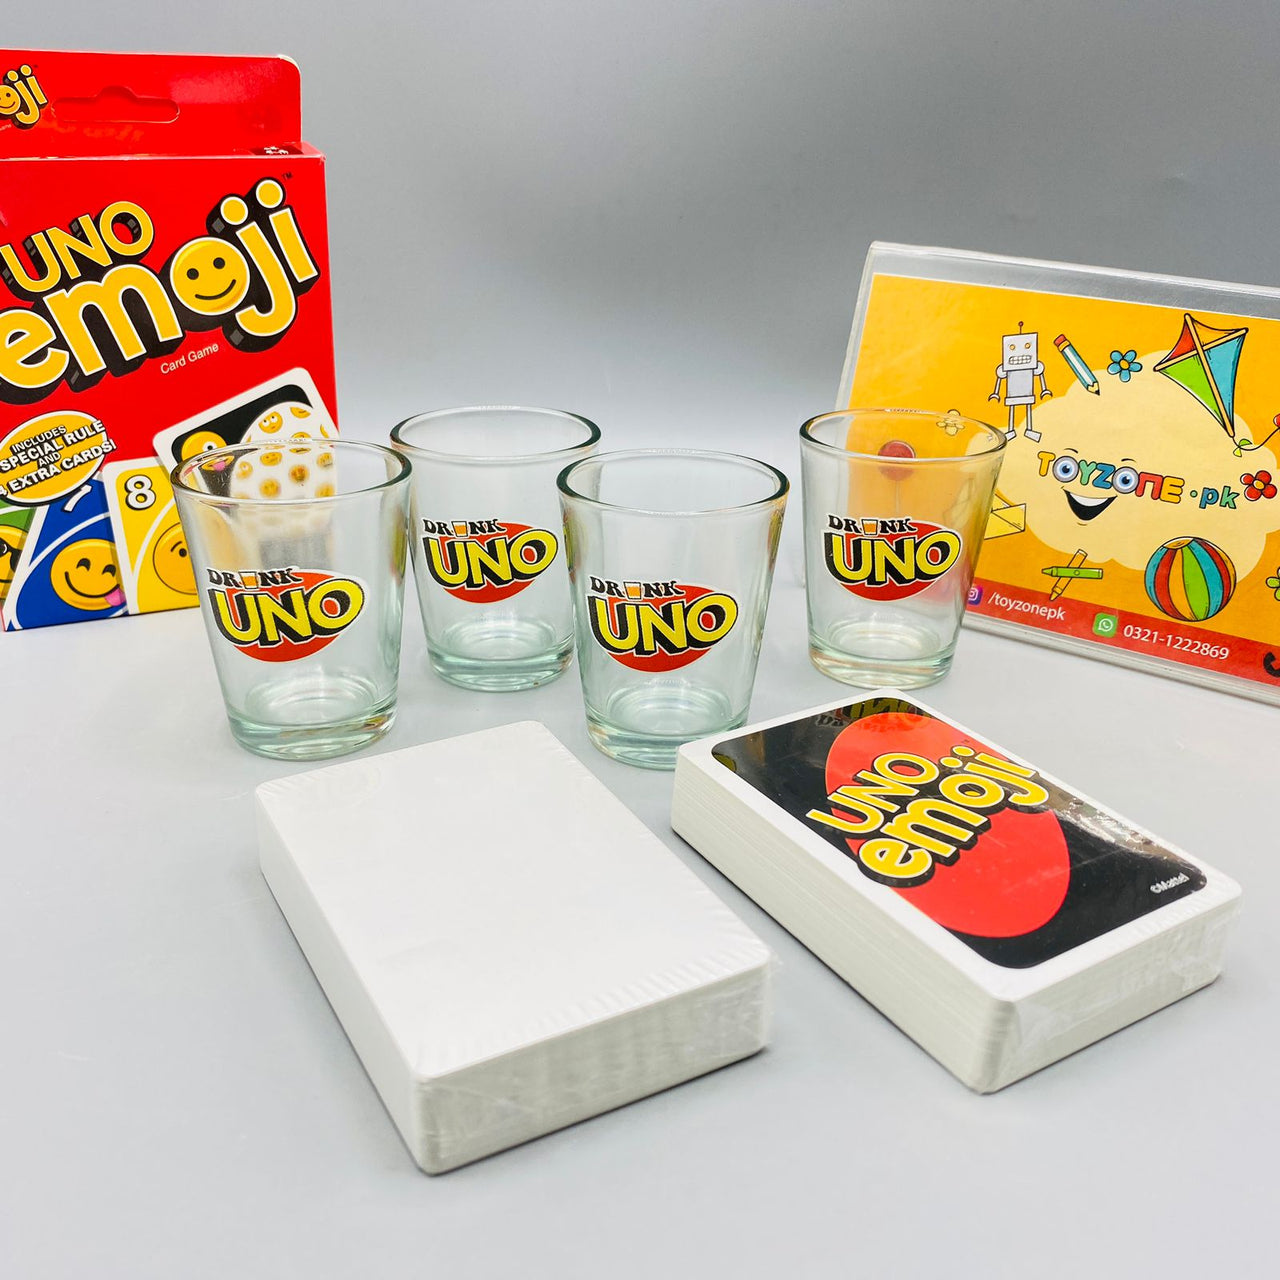 uno game card with shot glasses